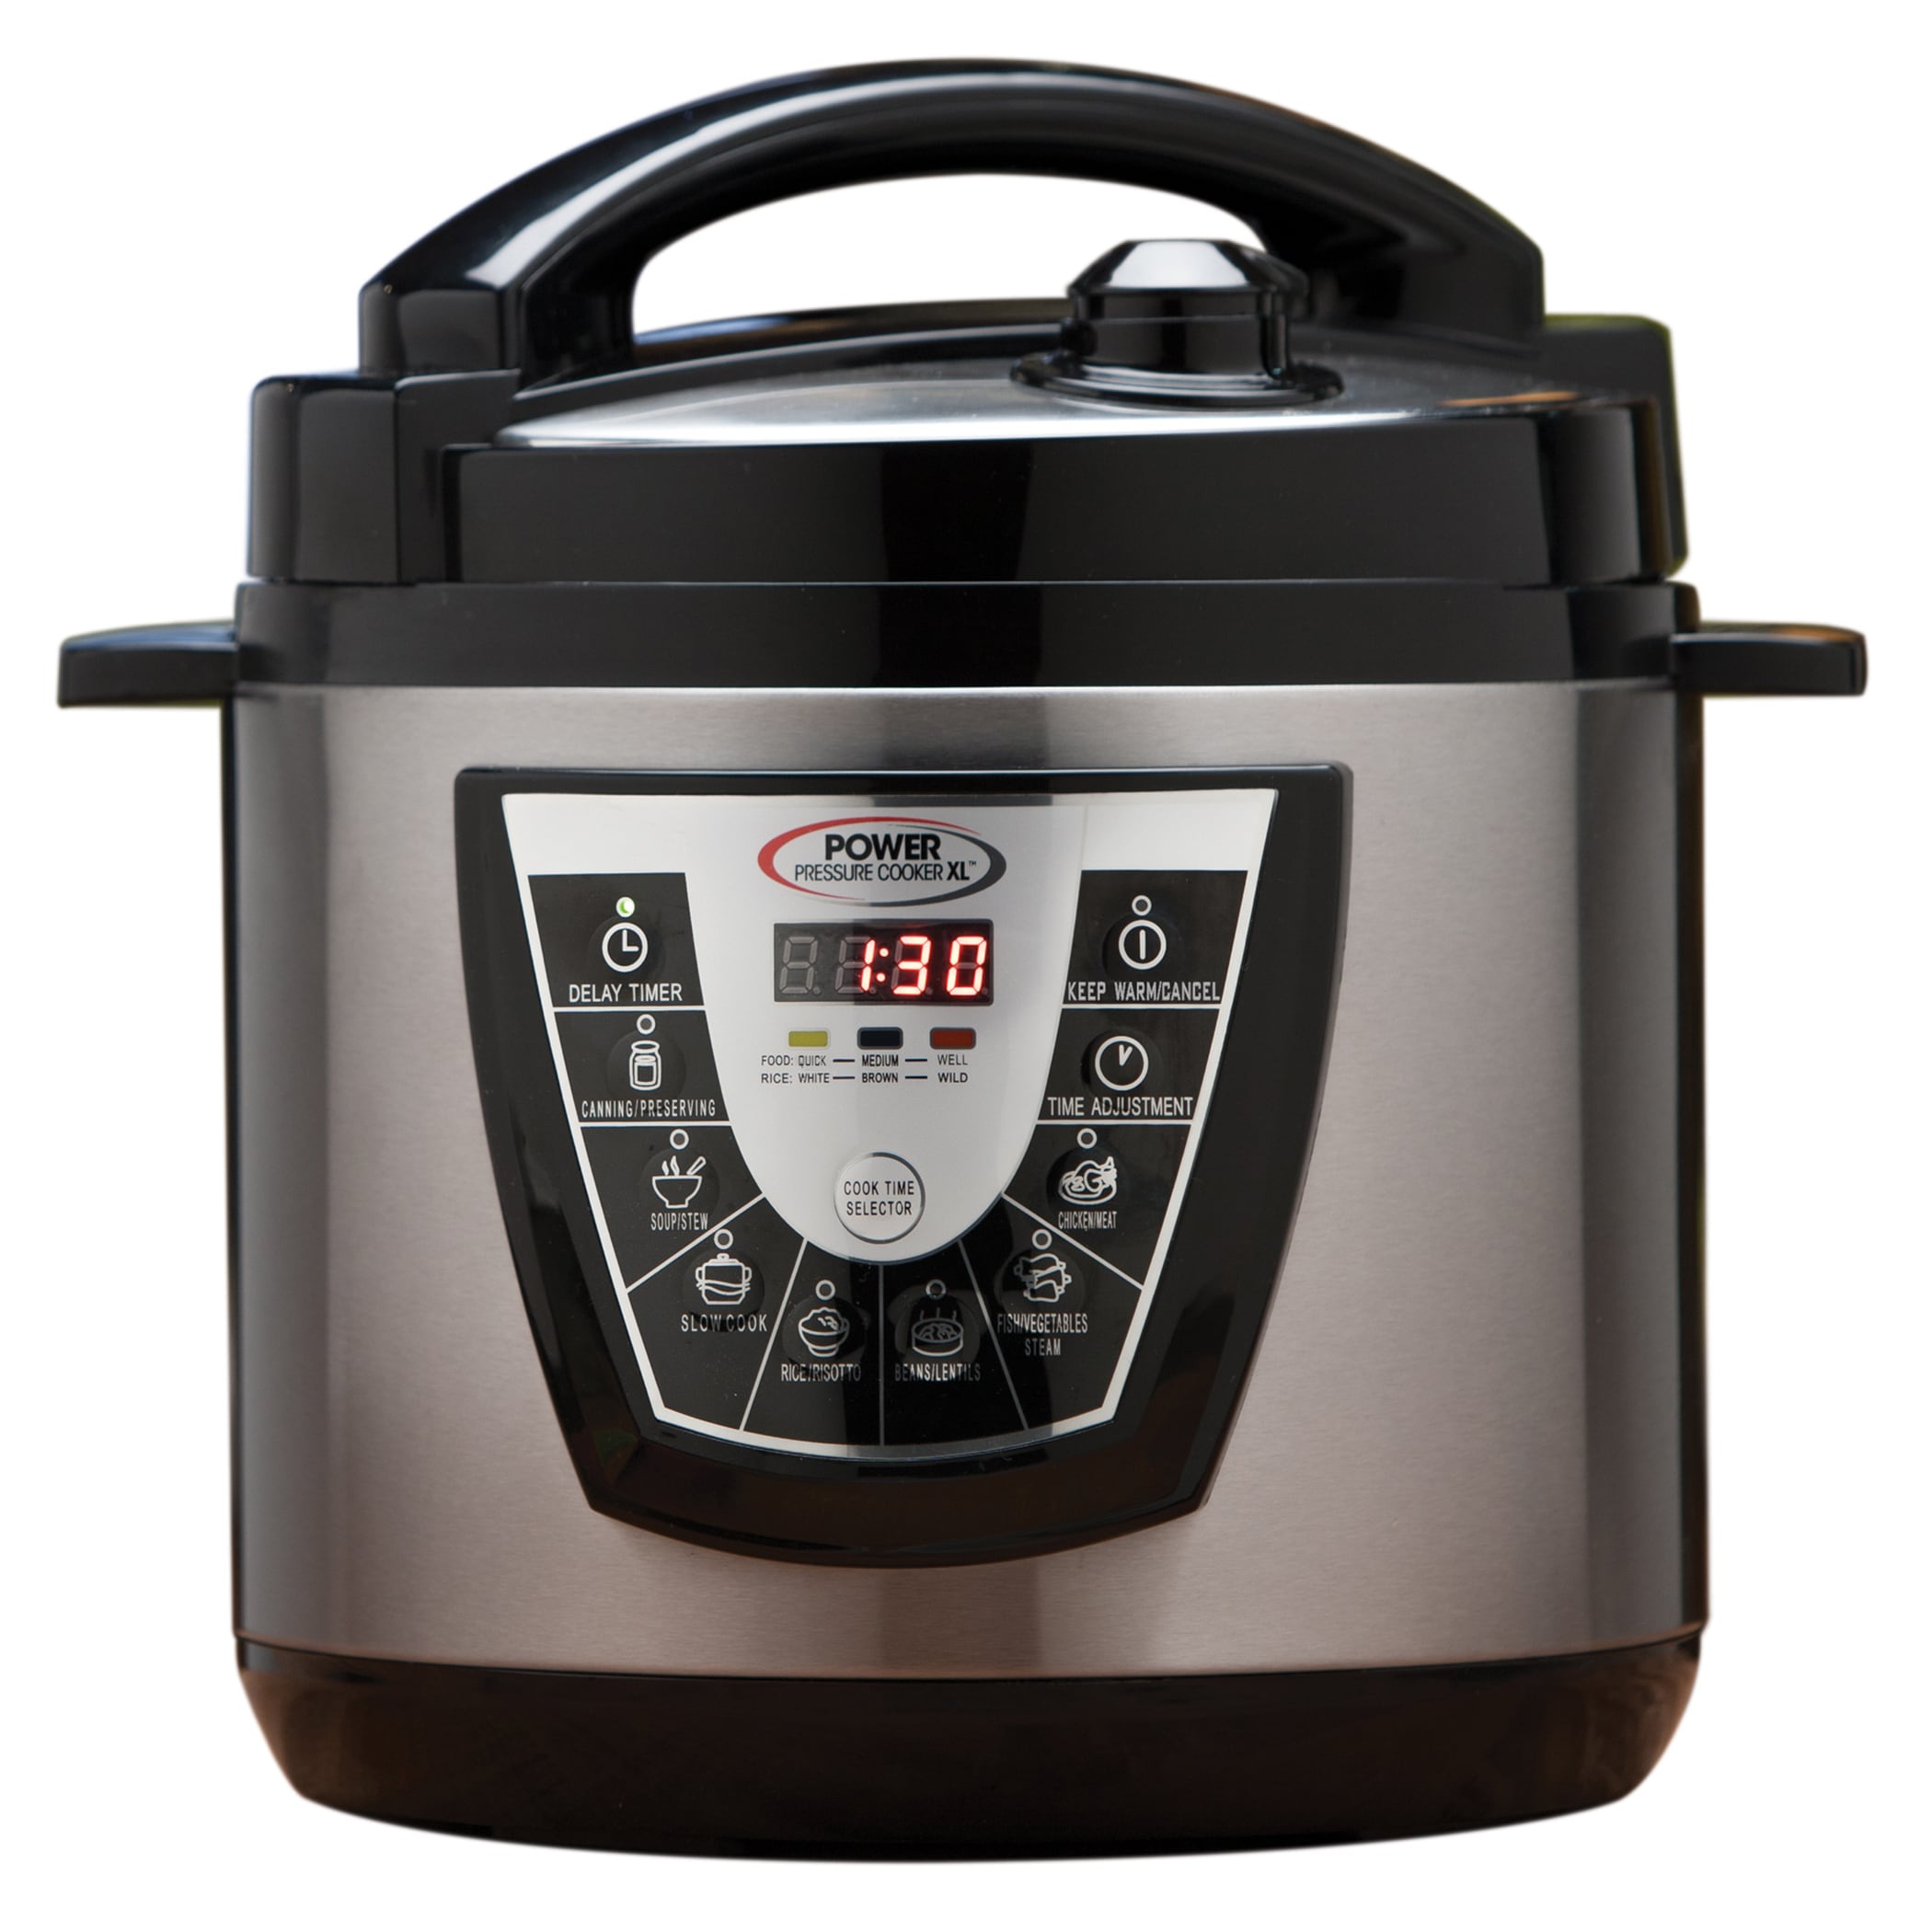 Tristar 6-Quart Programmable Electric Pressure Cooker at